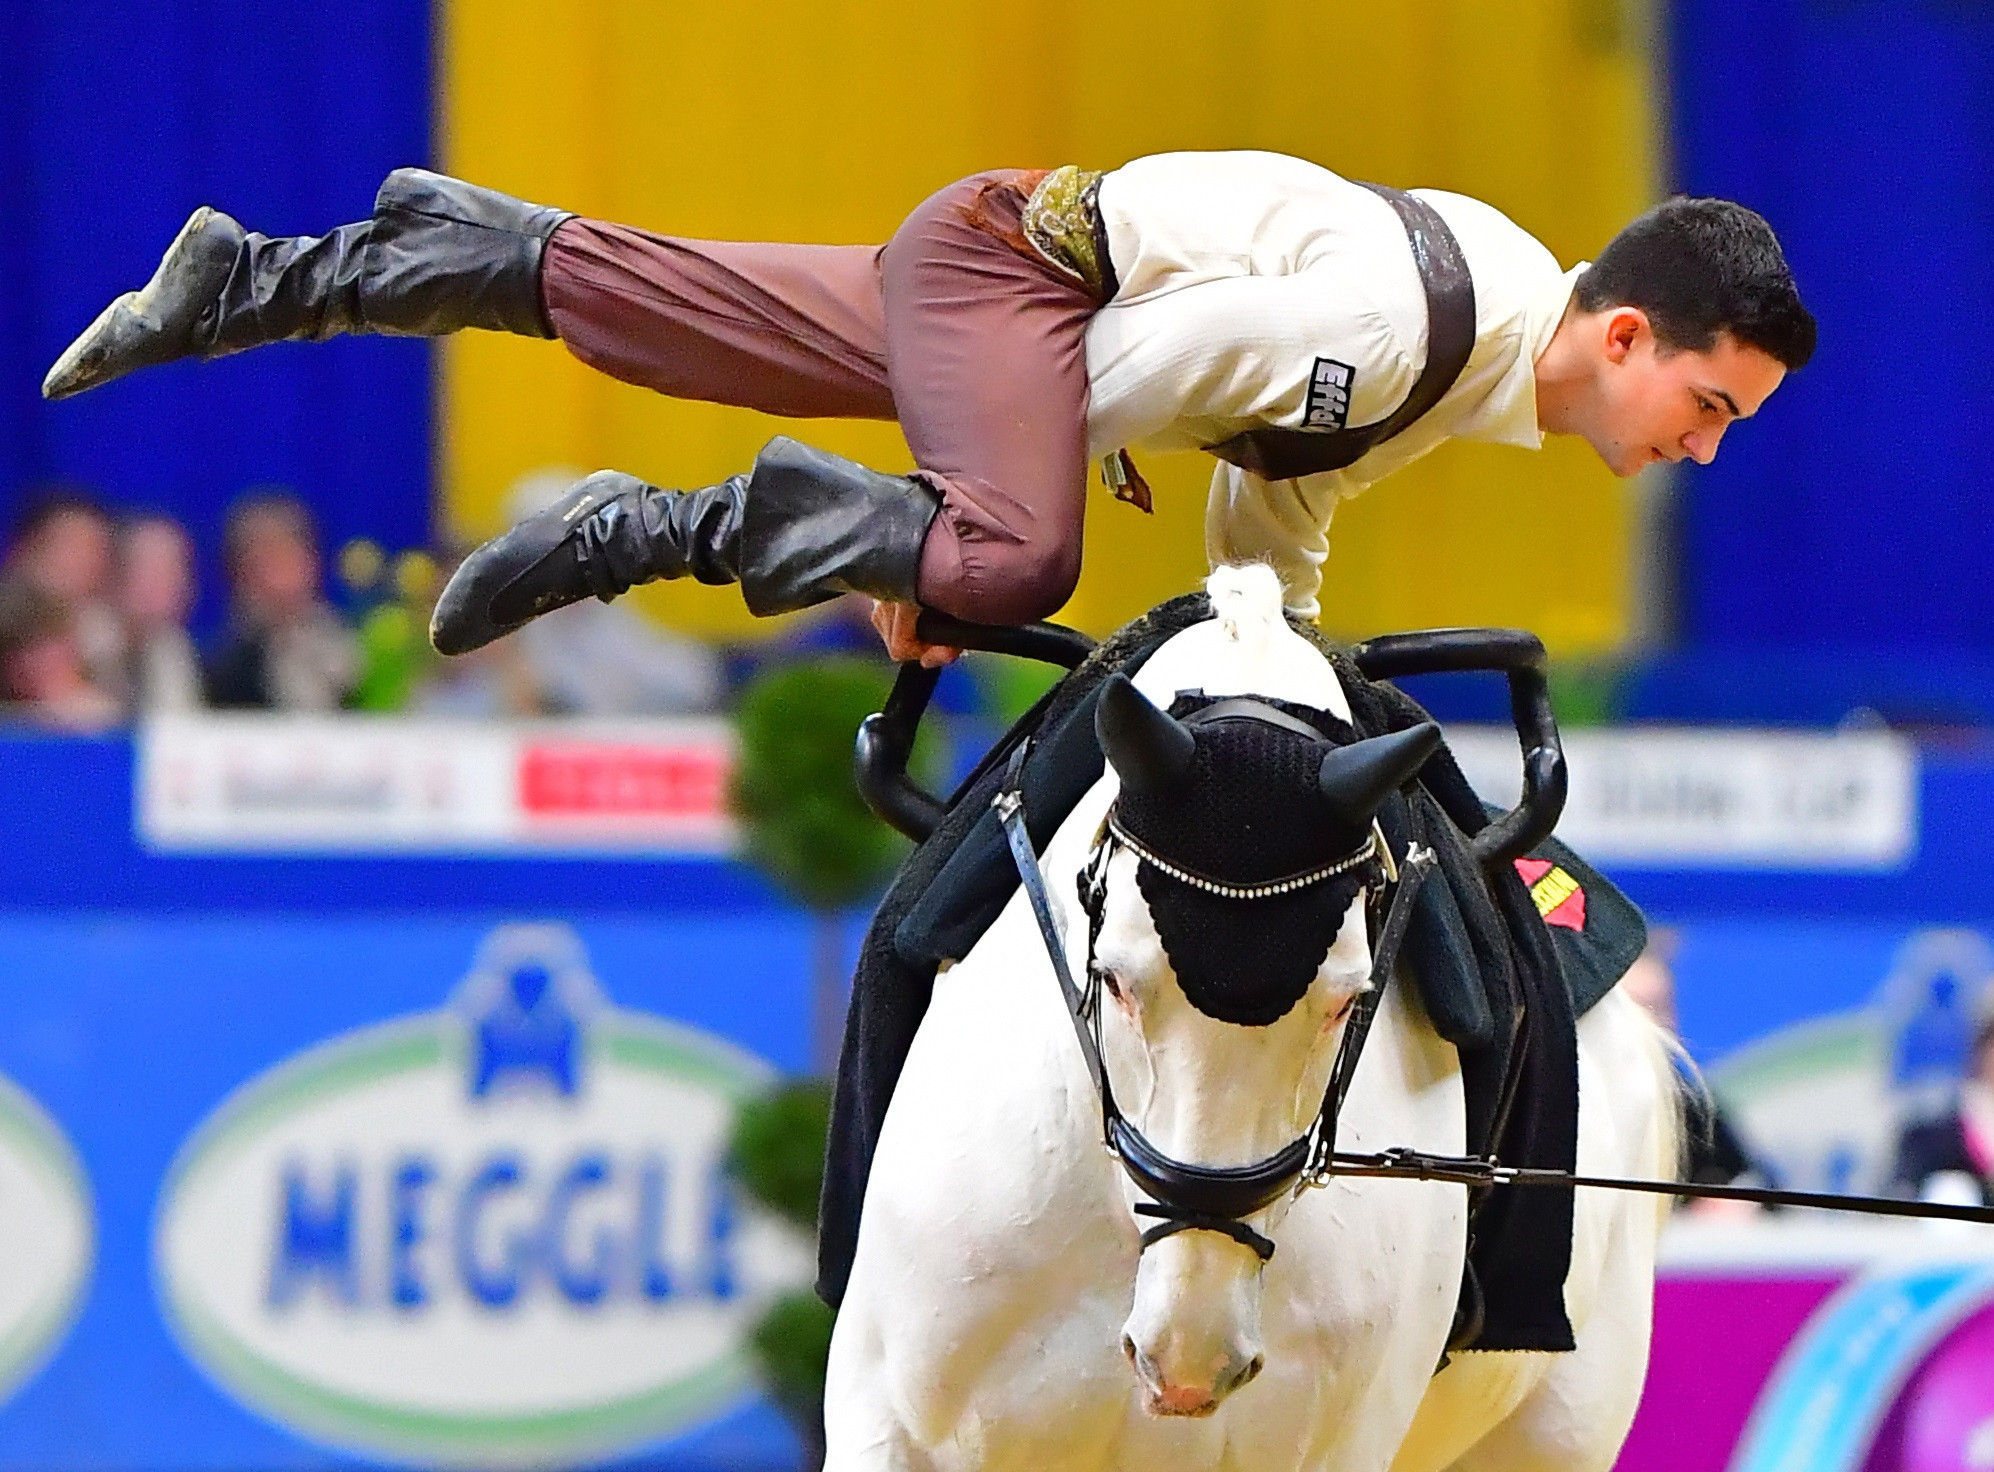 Germany's Jannis Drewell was crowned the FEI World Cup Vaulting male champion for a second year in a row ©FEI/Daniel Kaiser